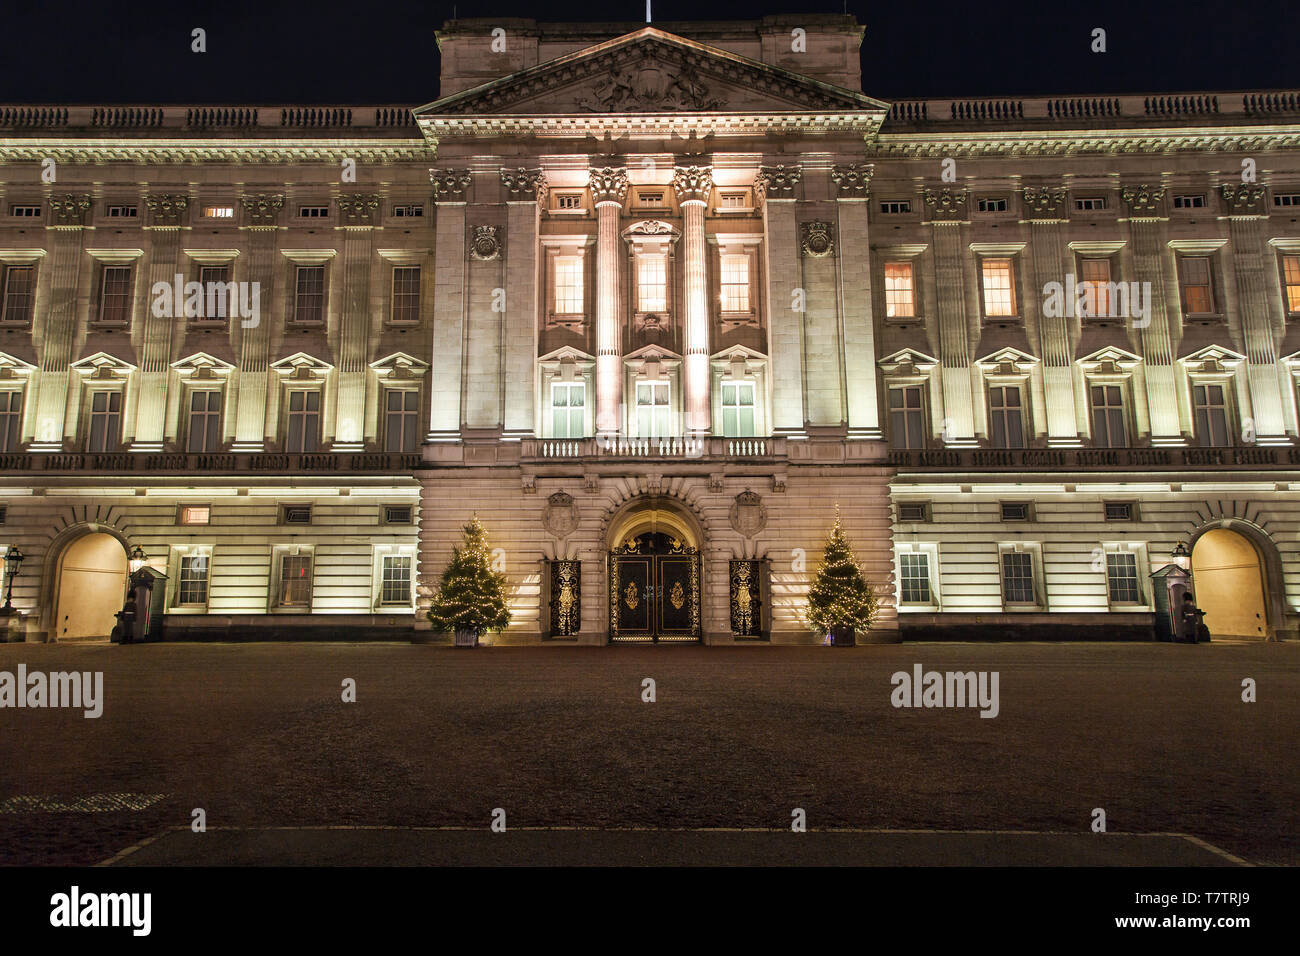 Night view of the front facade of Buckingham Palace at night, London, United Kingdom. Stock Photo